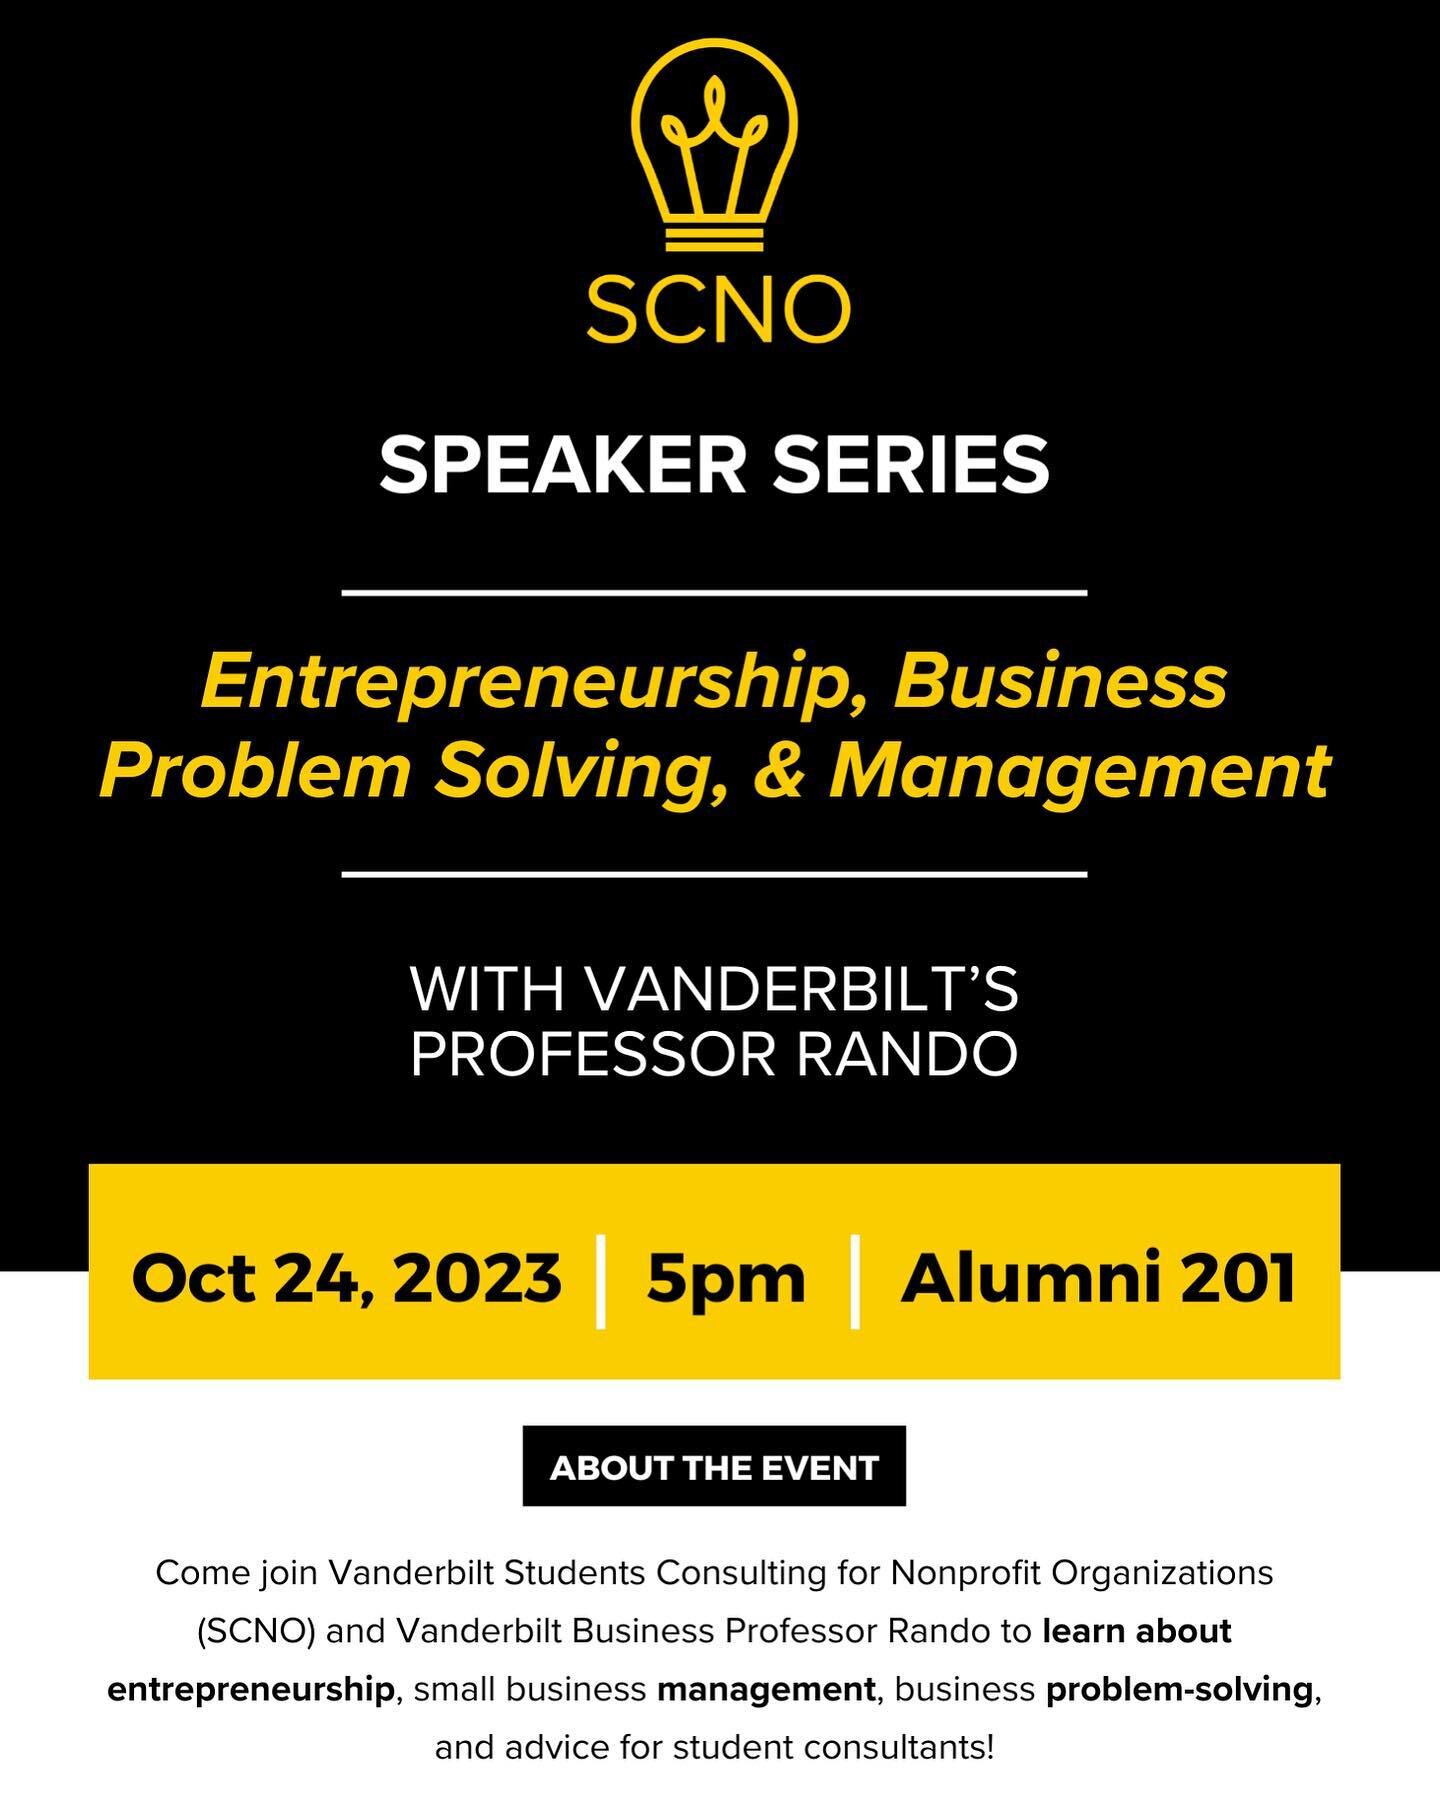 📣📣📣 Join us on Oct 24 to hear some invaluable advice about entrepreneurship, business problem solving, and management!!